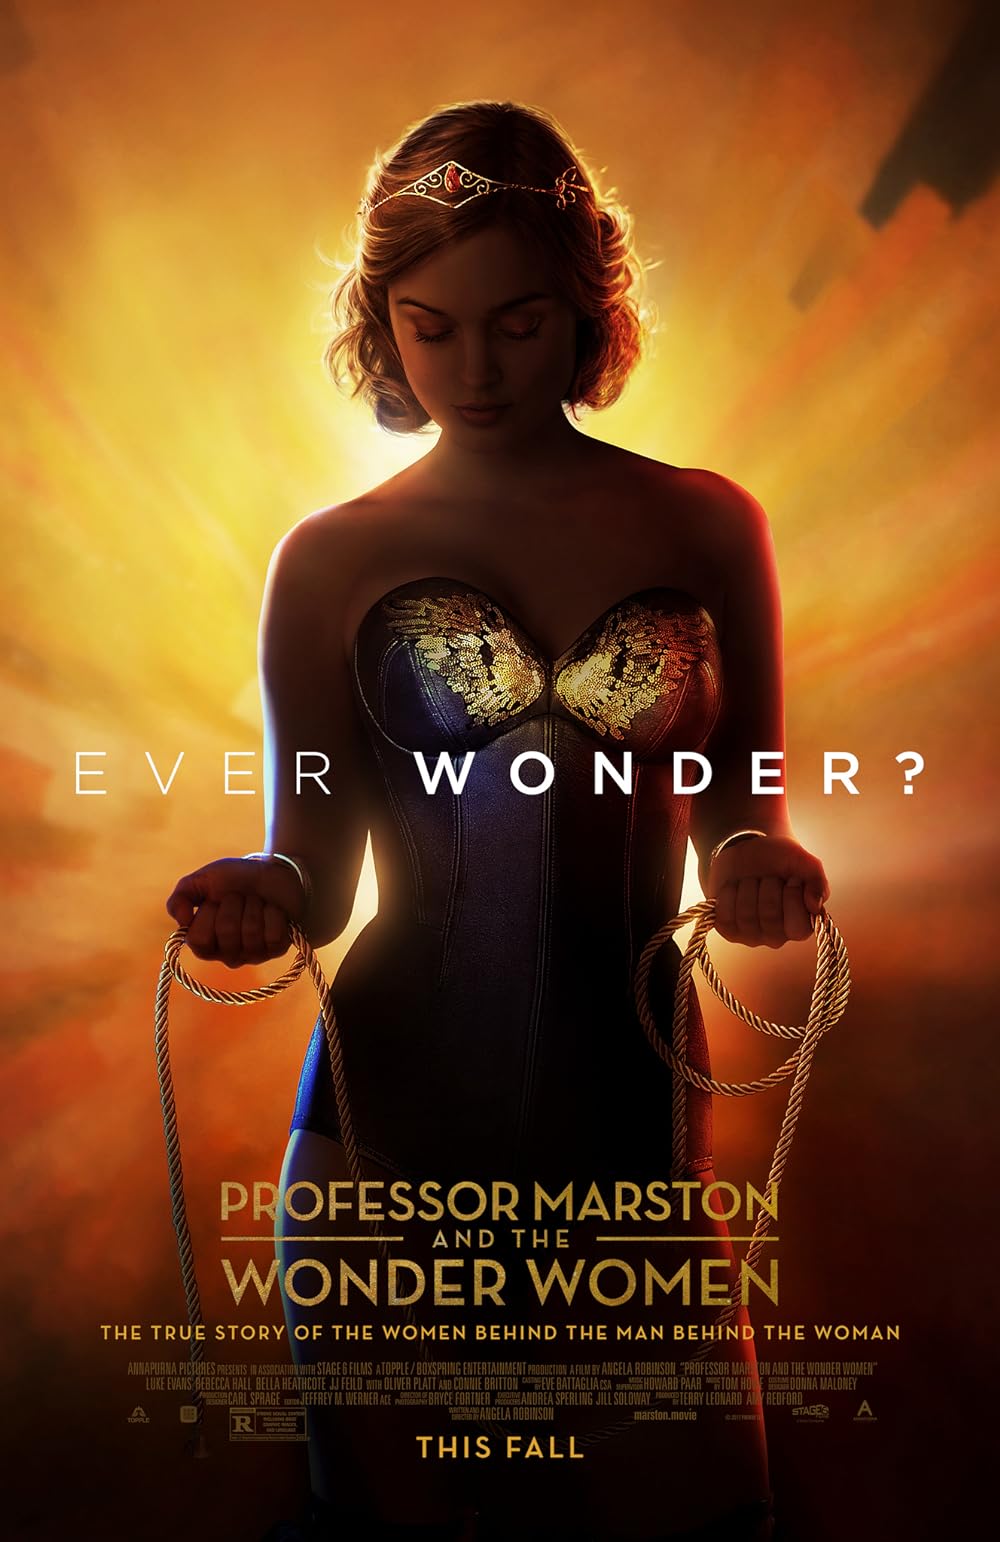 dorothee carlson recommends watch wonder woman full movie online pic